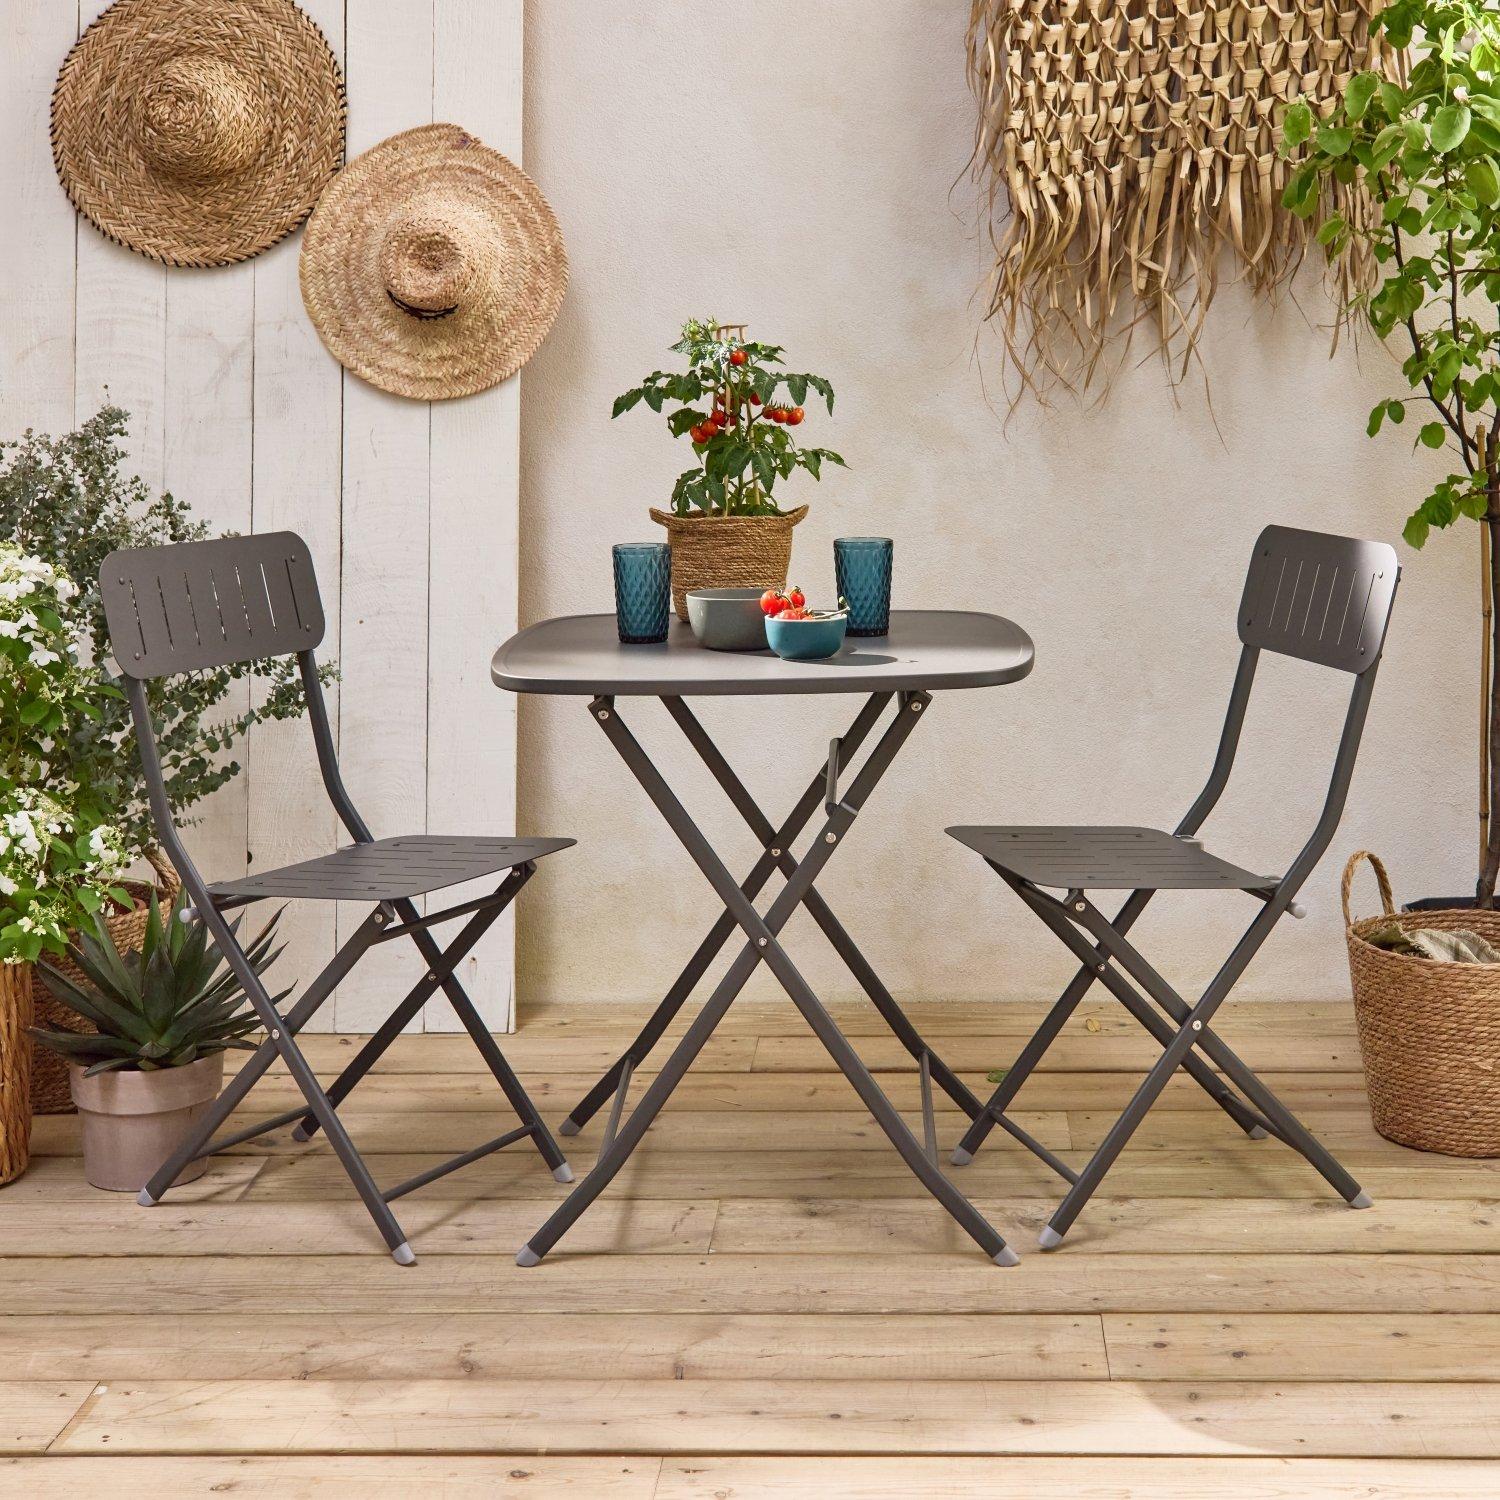 2-seater Bistro Garden Table With Chairs